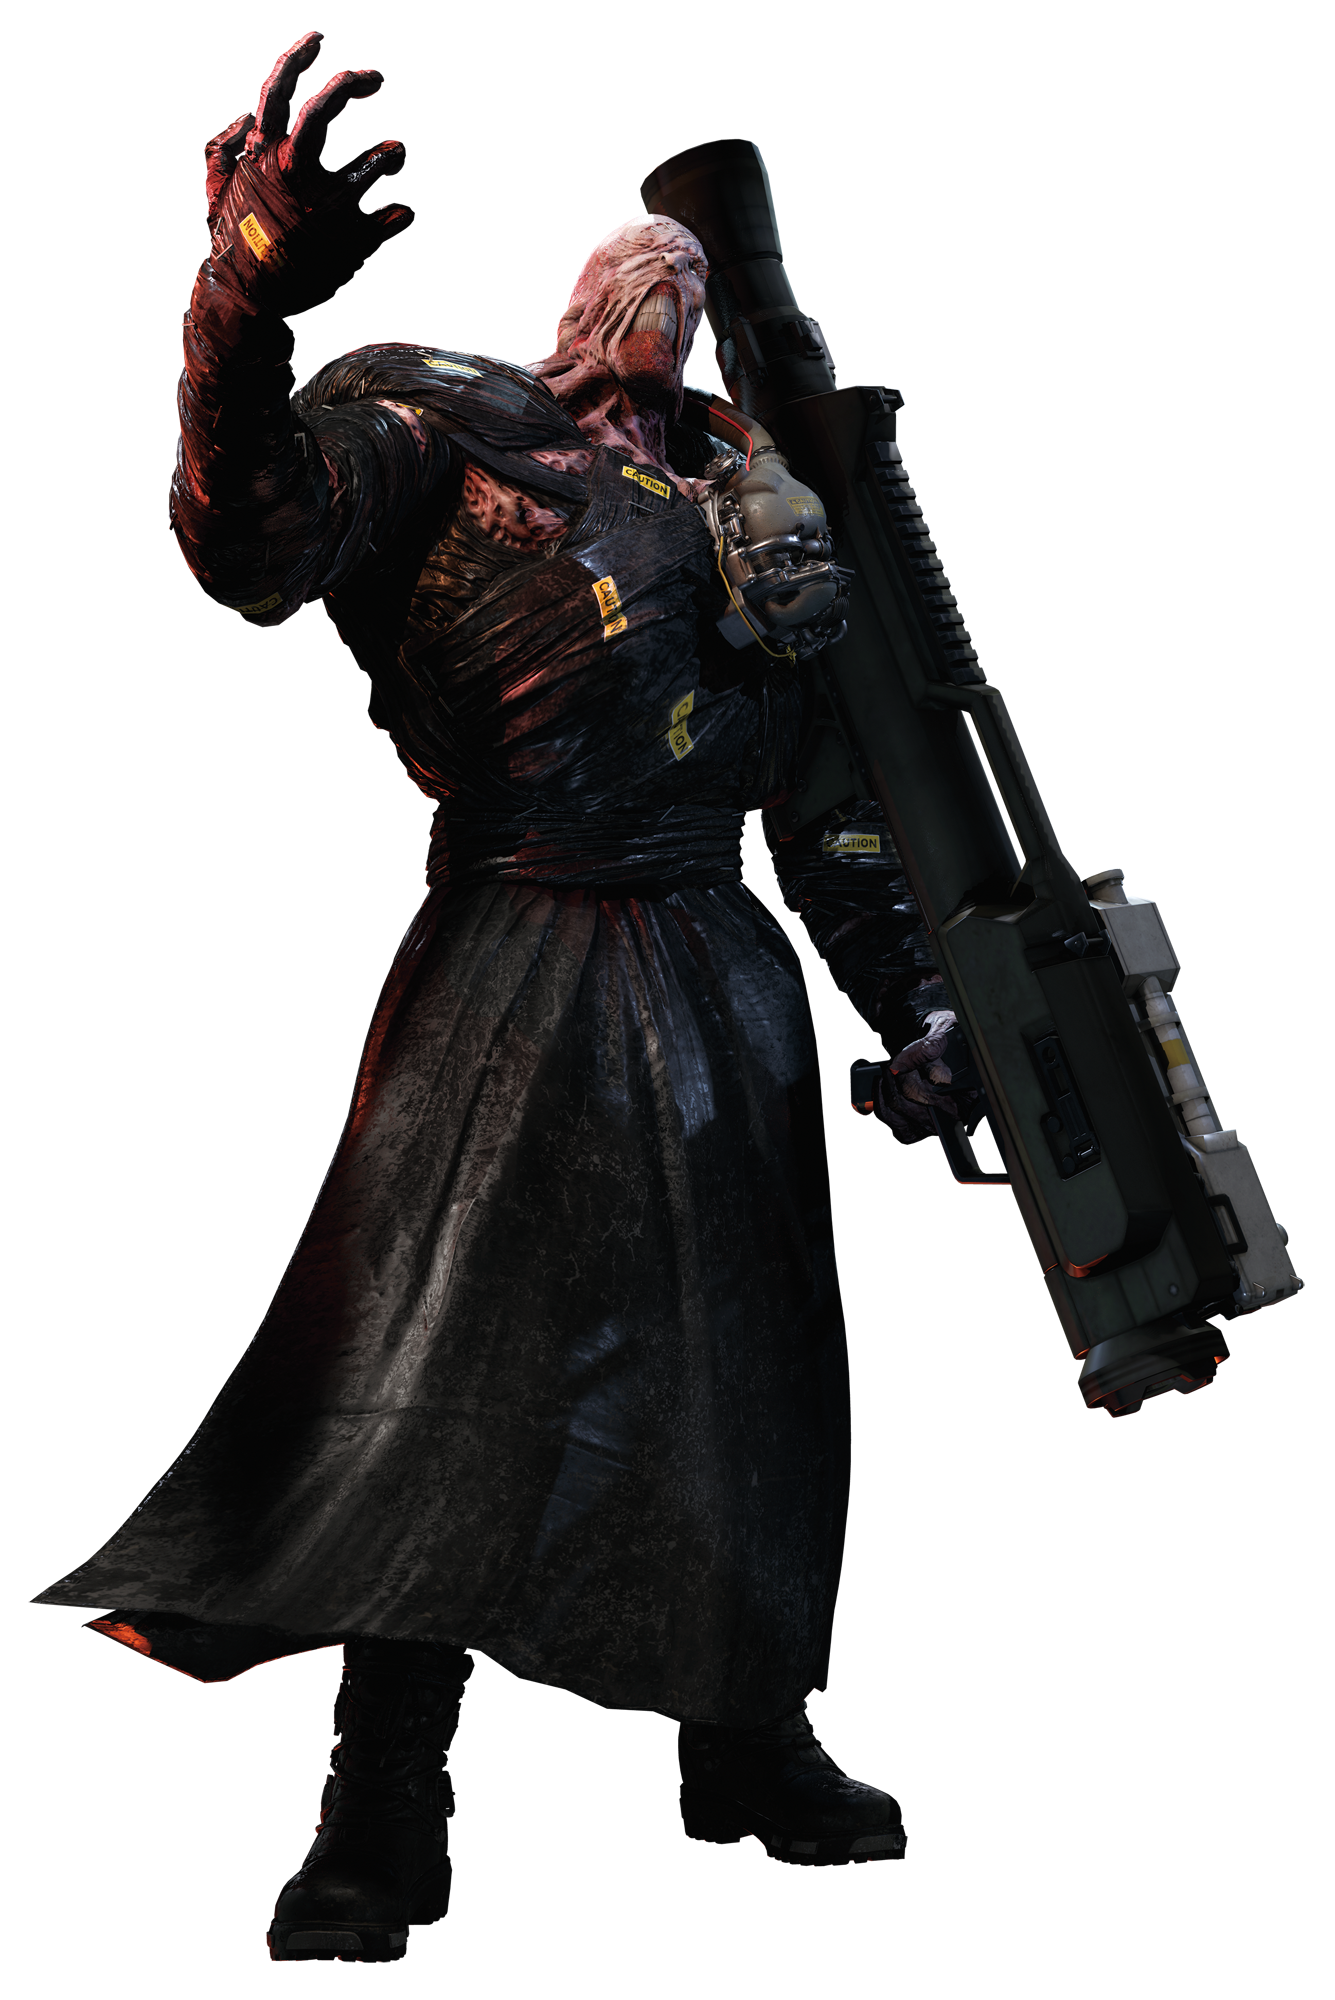 Resident Evil 3: Nemesis Resident Evil – Code: Veronica Resident Evil Zero Resident  Evil: The Darkside Chronicles, others transparent background PNG clipart